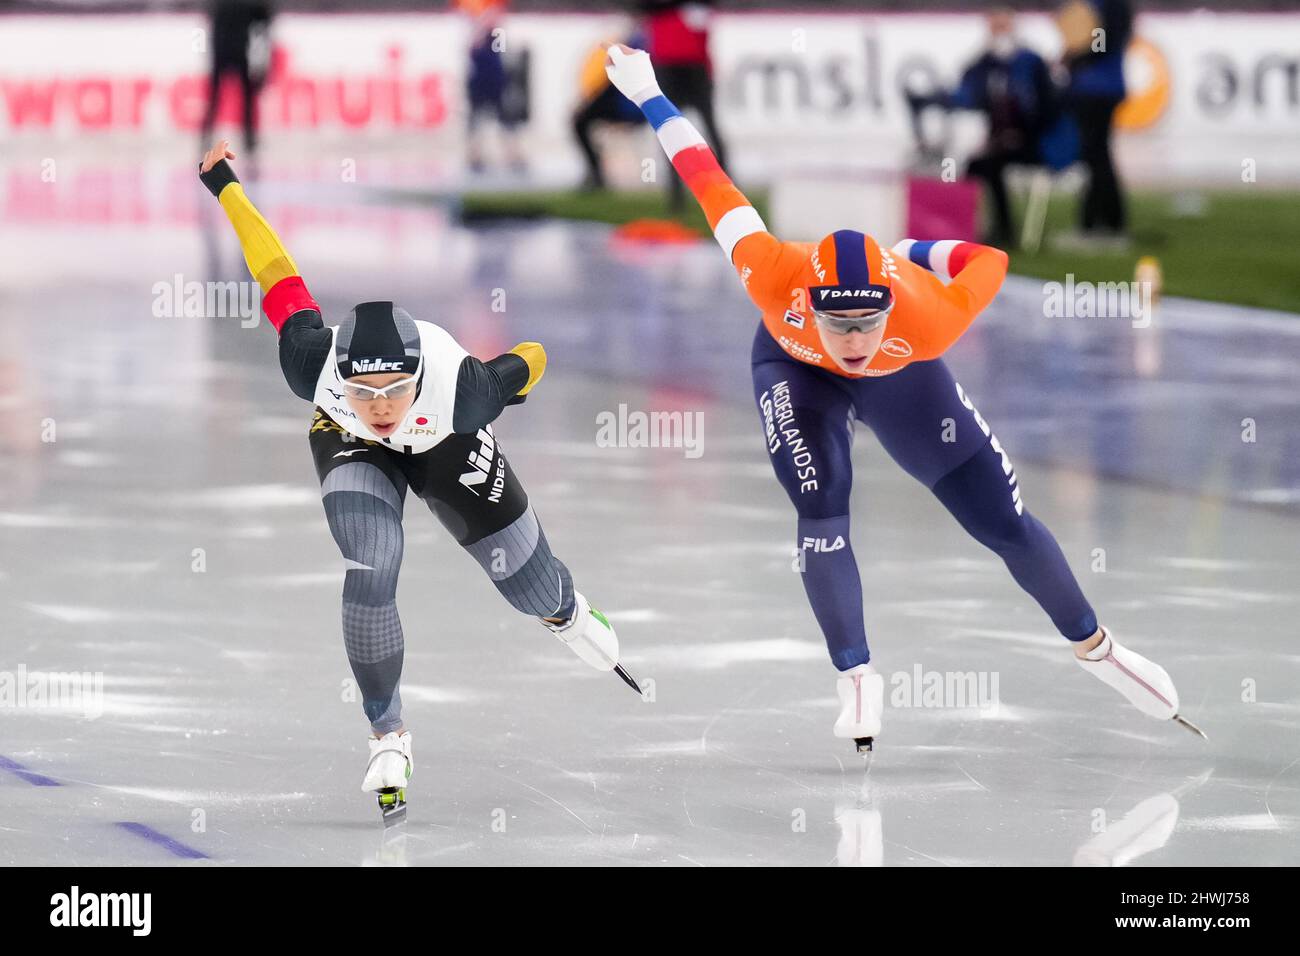 HAMAR, NORWAY - MARCH 6: Nana Takagi of Japan and Antoinette de Jong of the Netherlands competing in the Women's 1500m during the ISU World Speed Skating Championships Allround at the Vikingskipet on March 6, 2022 in Hamar, Norway (Photo by Douwe Bijlsma/Orange Pictures) Stock Photo